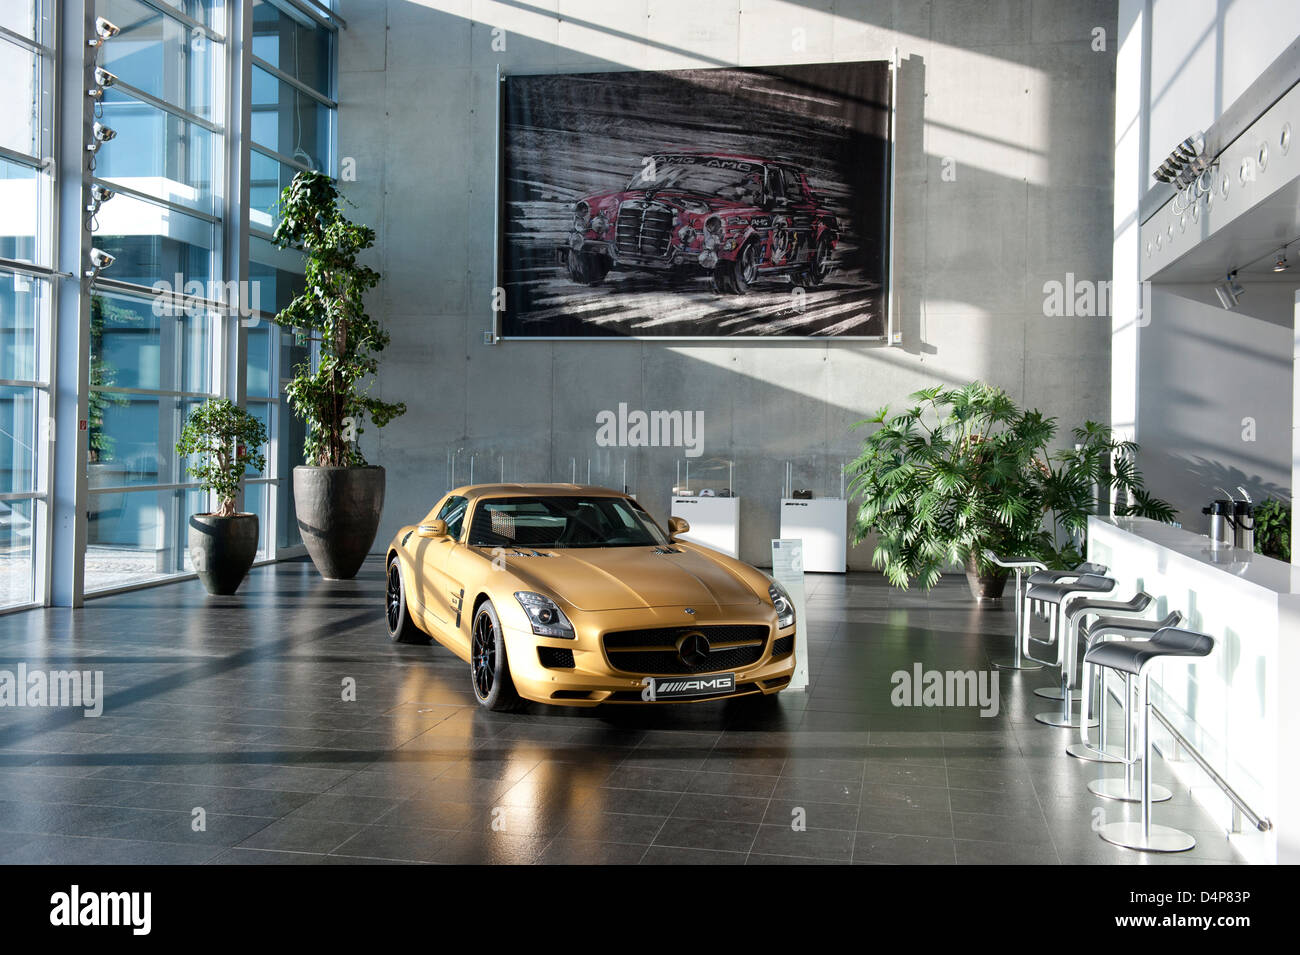 Affalterbach, Germany, showroom of Mercedes-AMG Stock Photo